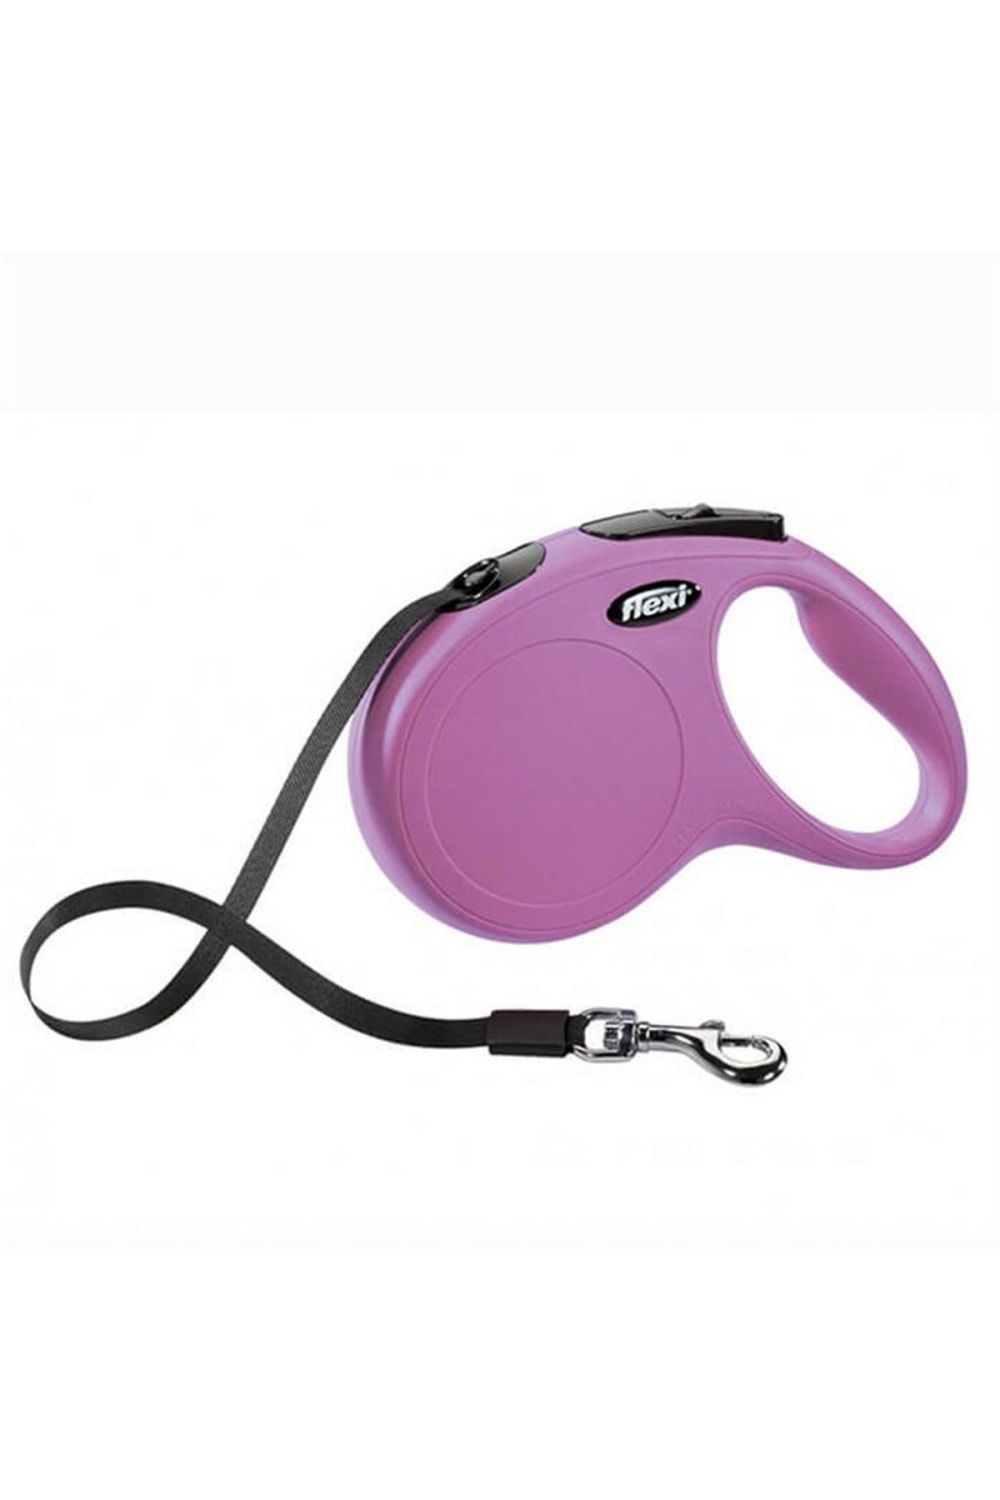 New Classic Retractable Dog Cord - Pink